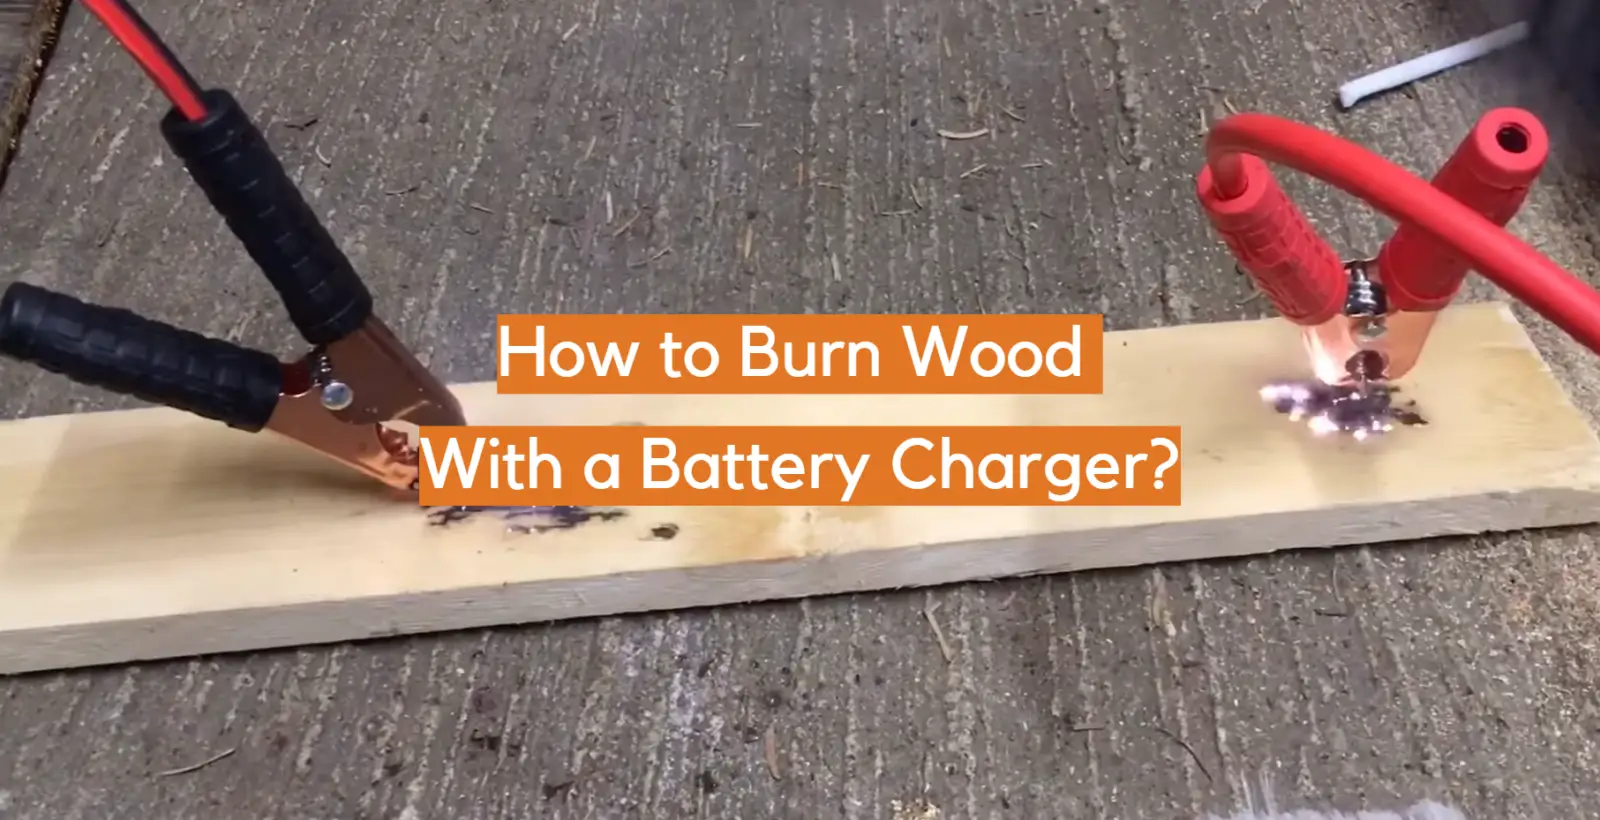 How to Burn Wood With a Battery Charger?